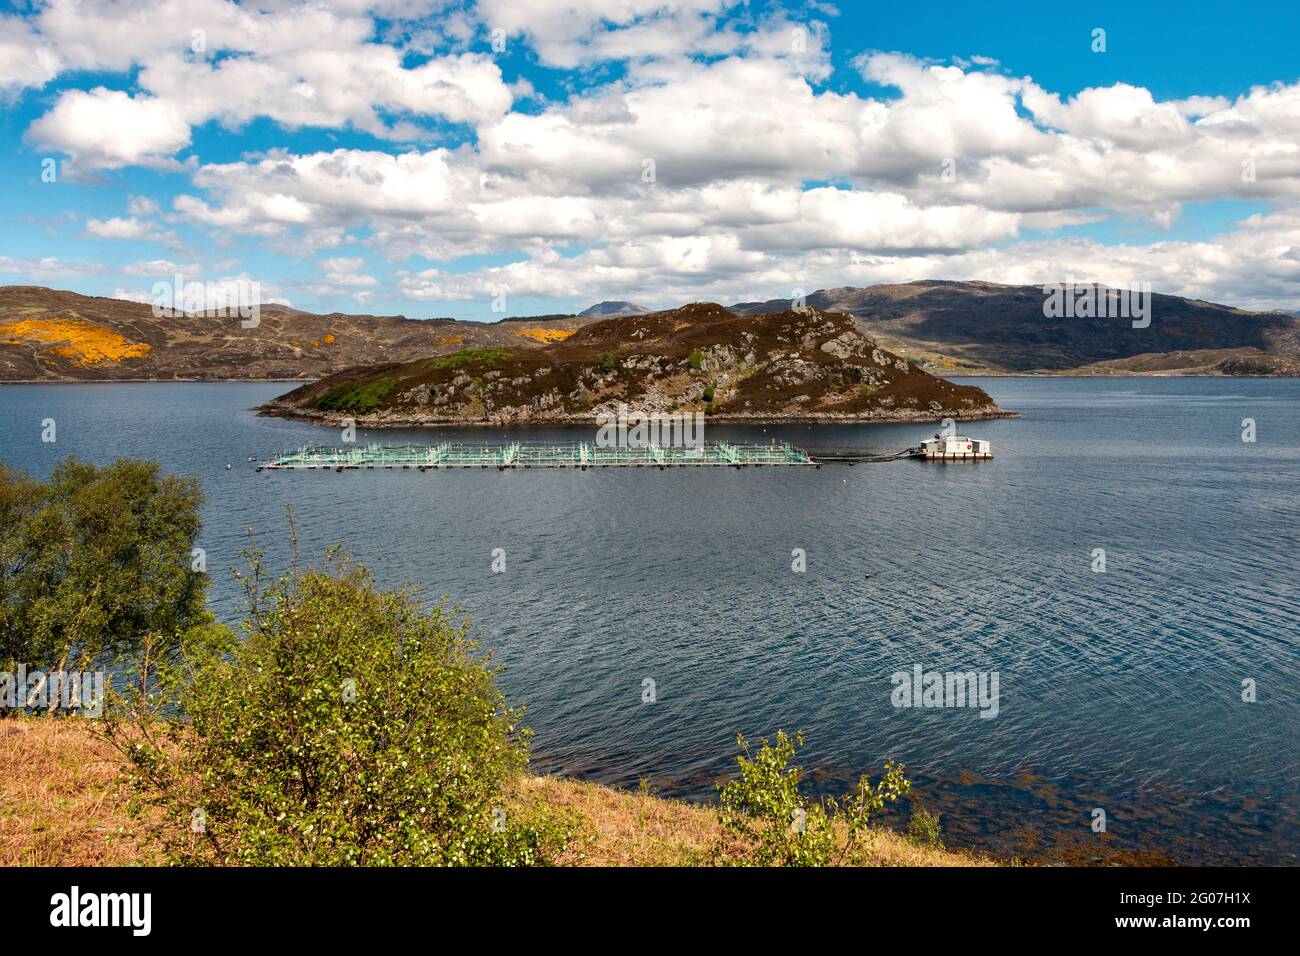 SALMON FISH REARING CAGES MOORED IN LOCH A CHAIRN BHAIN NEAR KYLESKU WEST COAST SCOTLAND Stock Photo